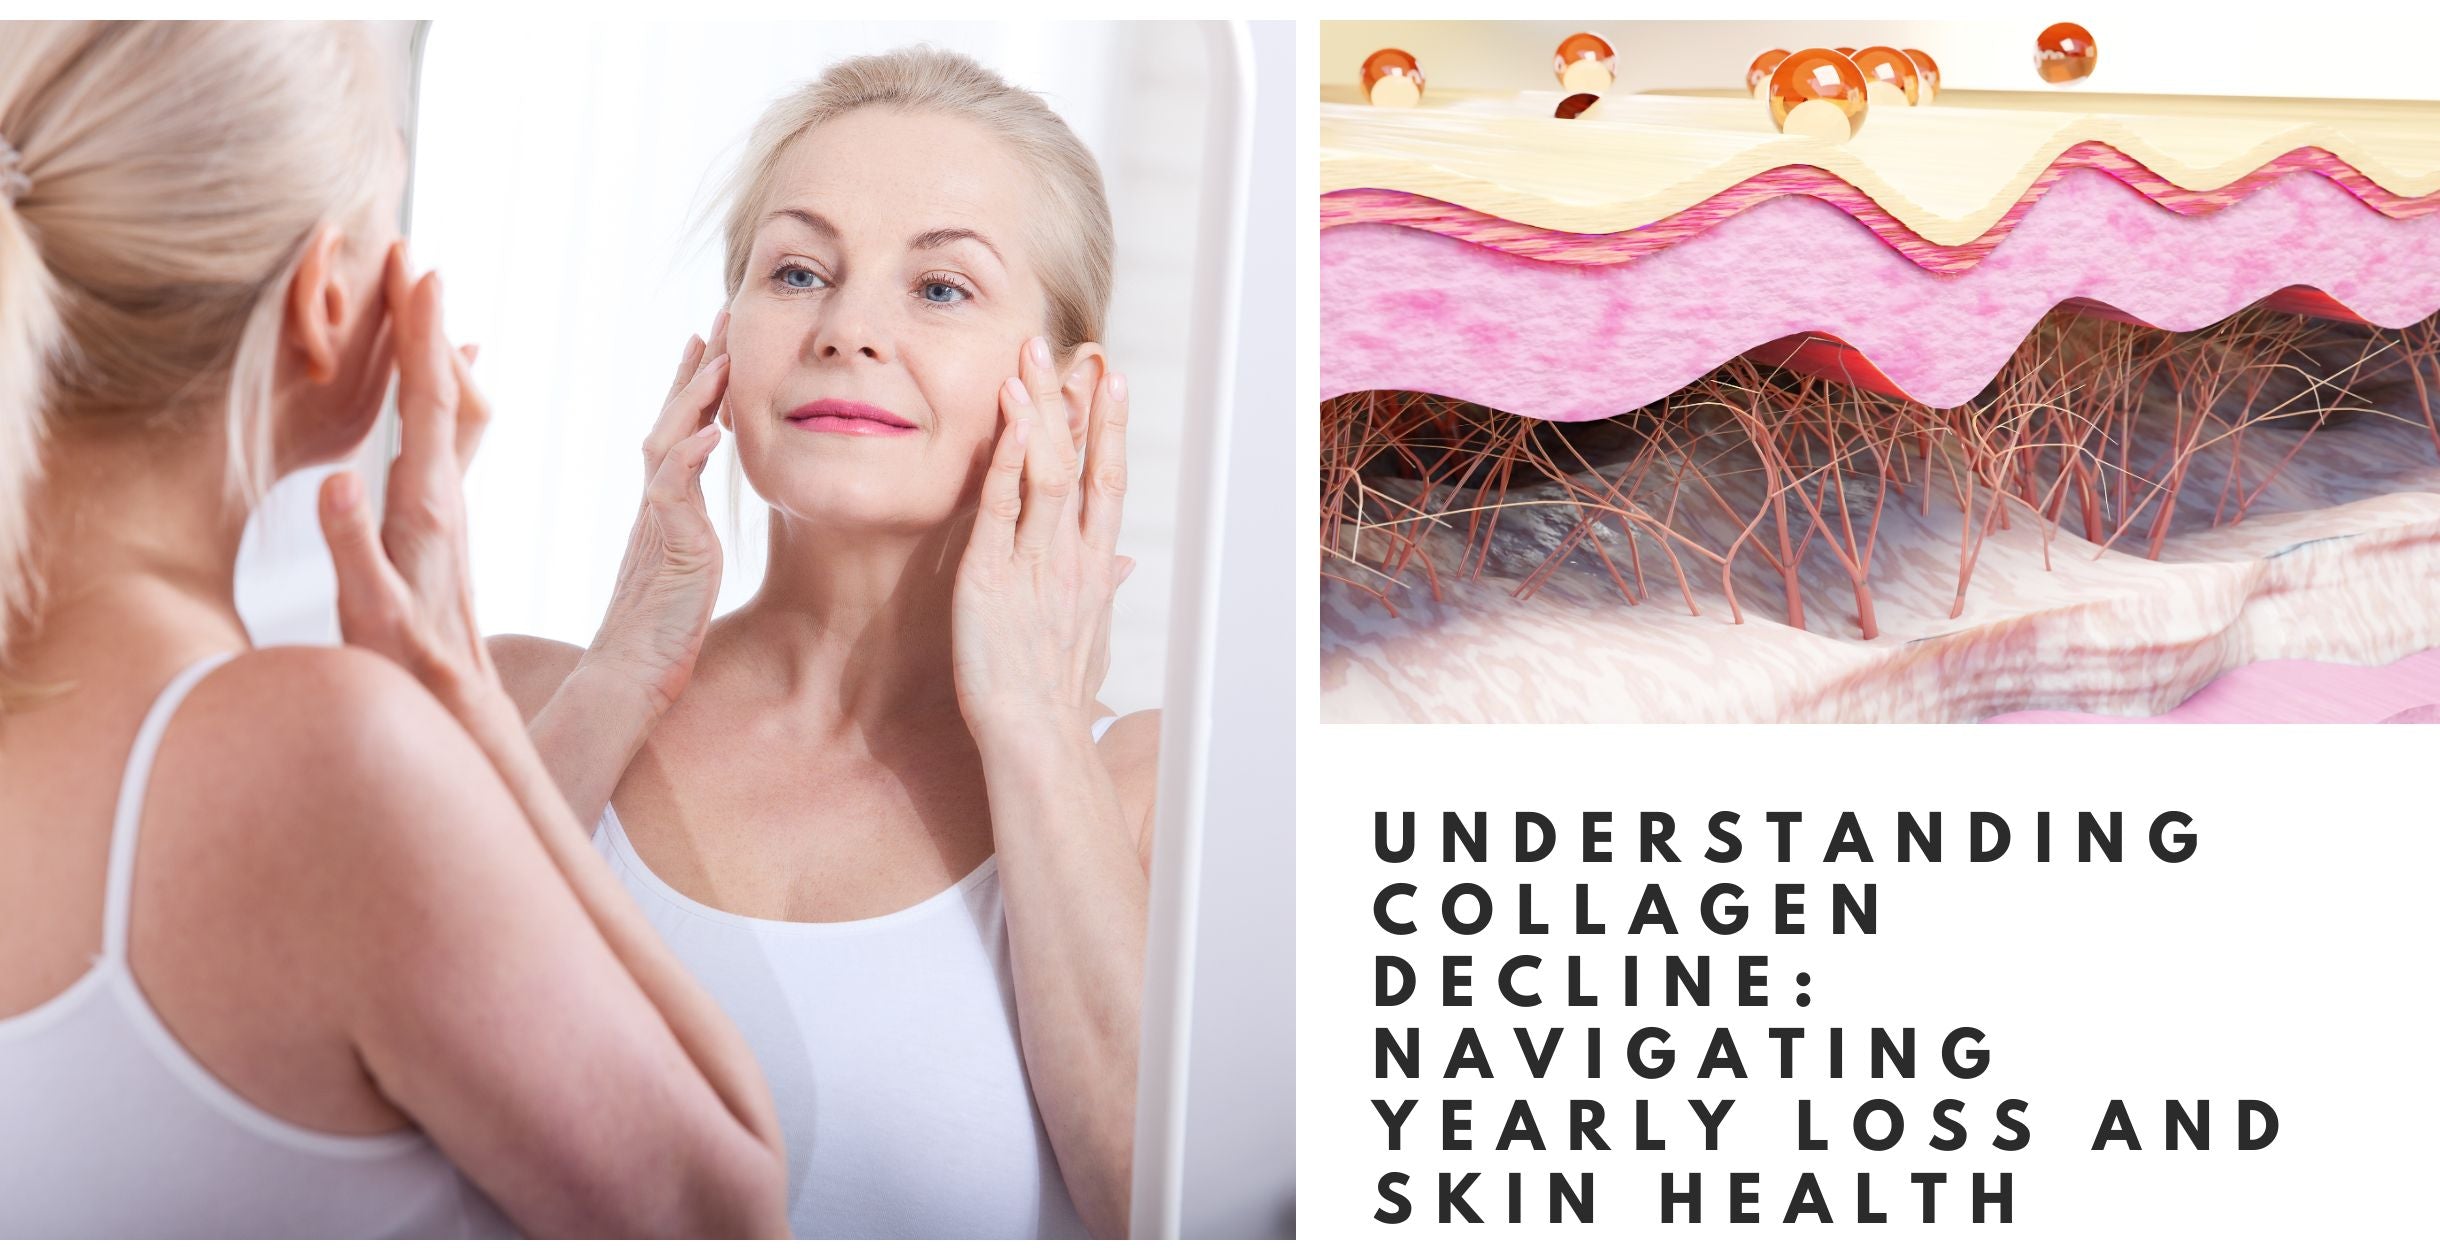 Understanding Collagen Decline: Navigating Yearly Loss and Skin Health